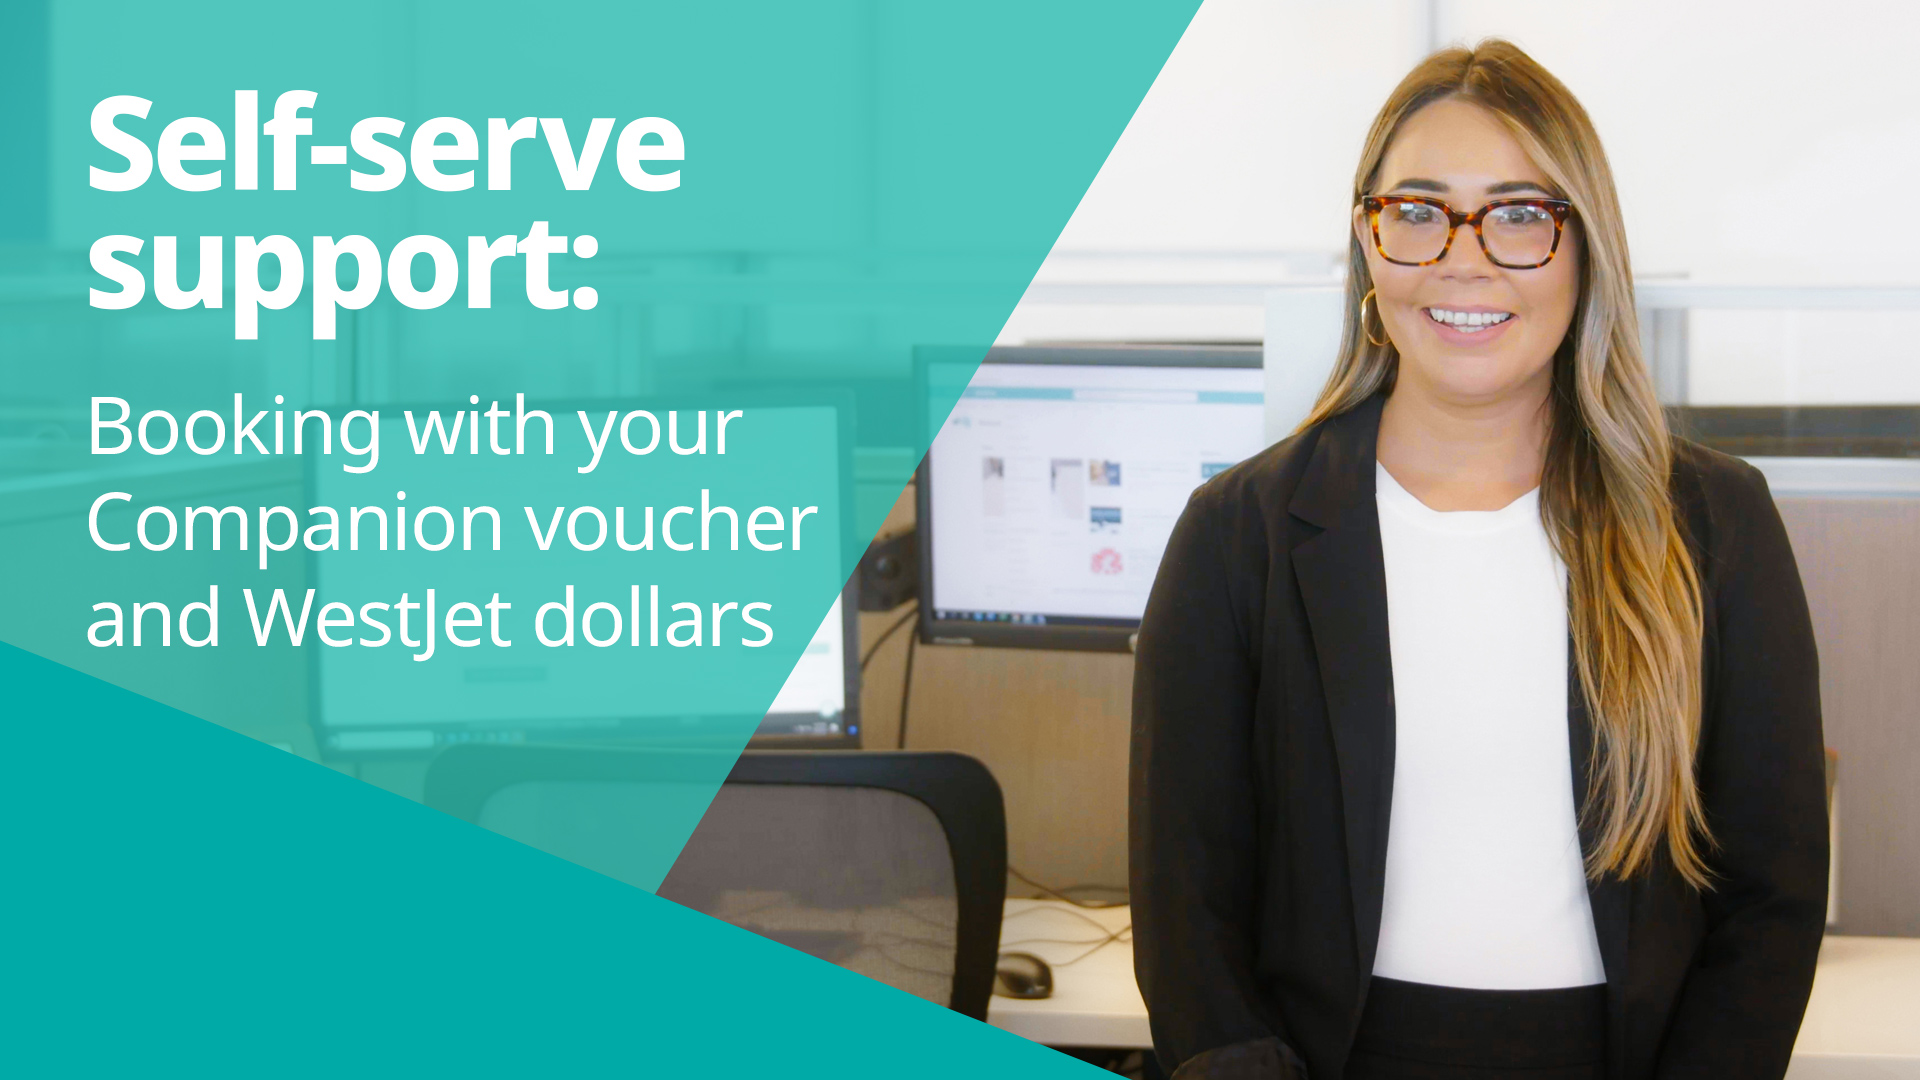 Self-serve support: Booking with your Companion voucher and WestJet Dollars with service agent Arianna 